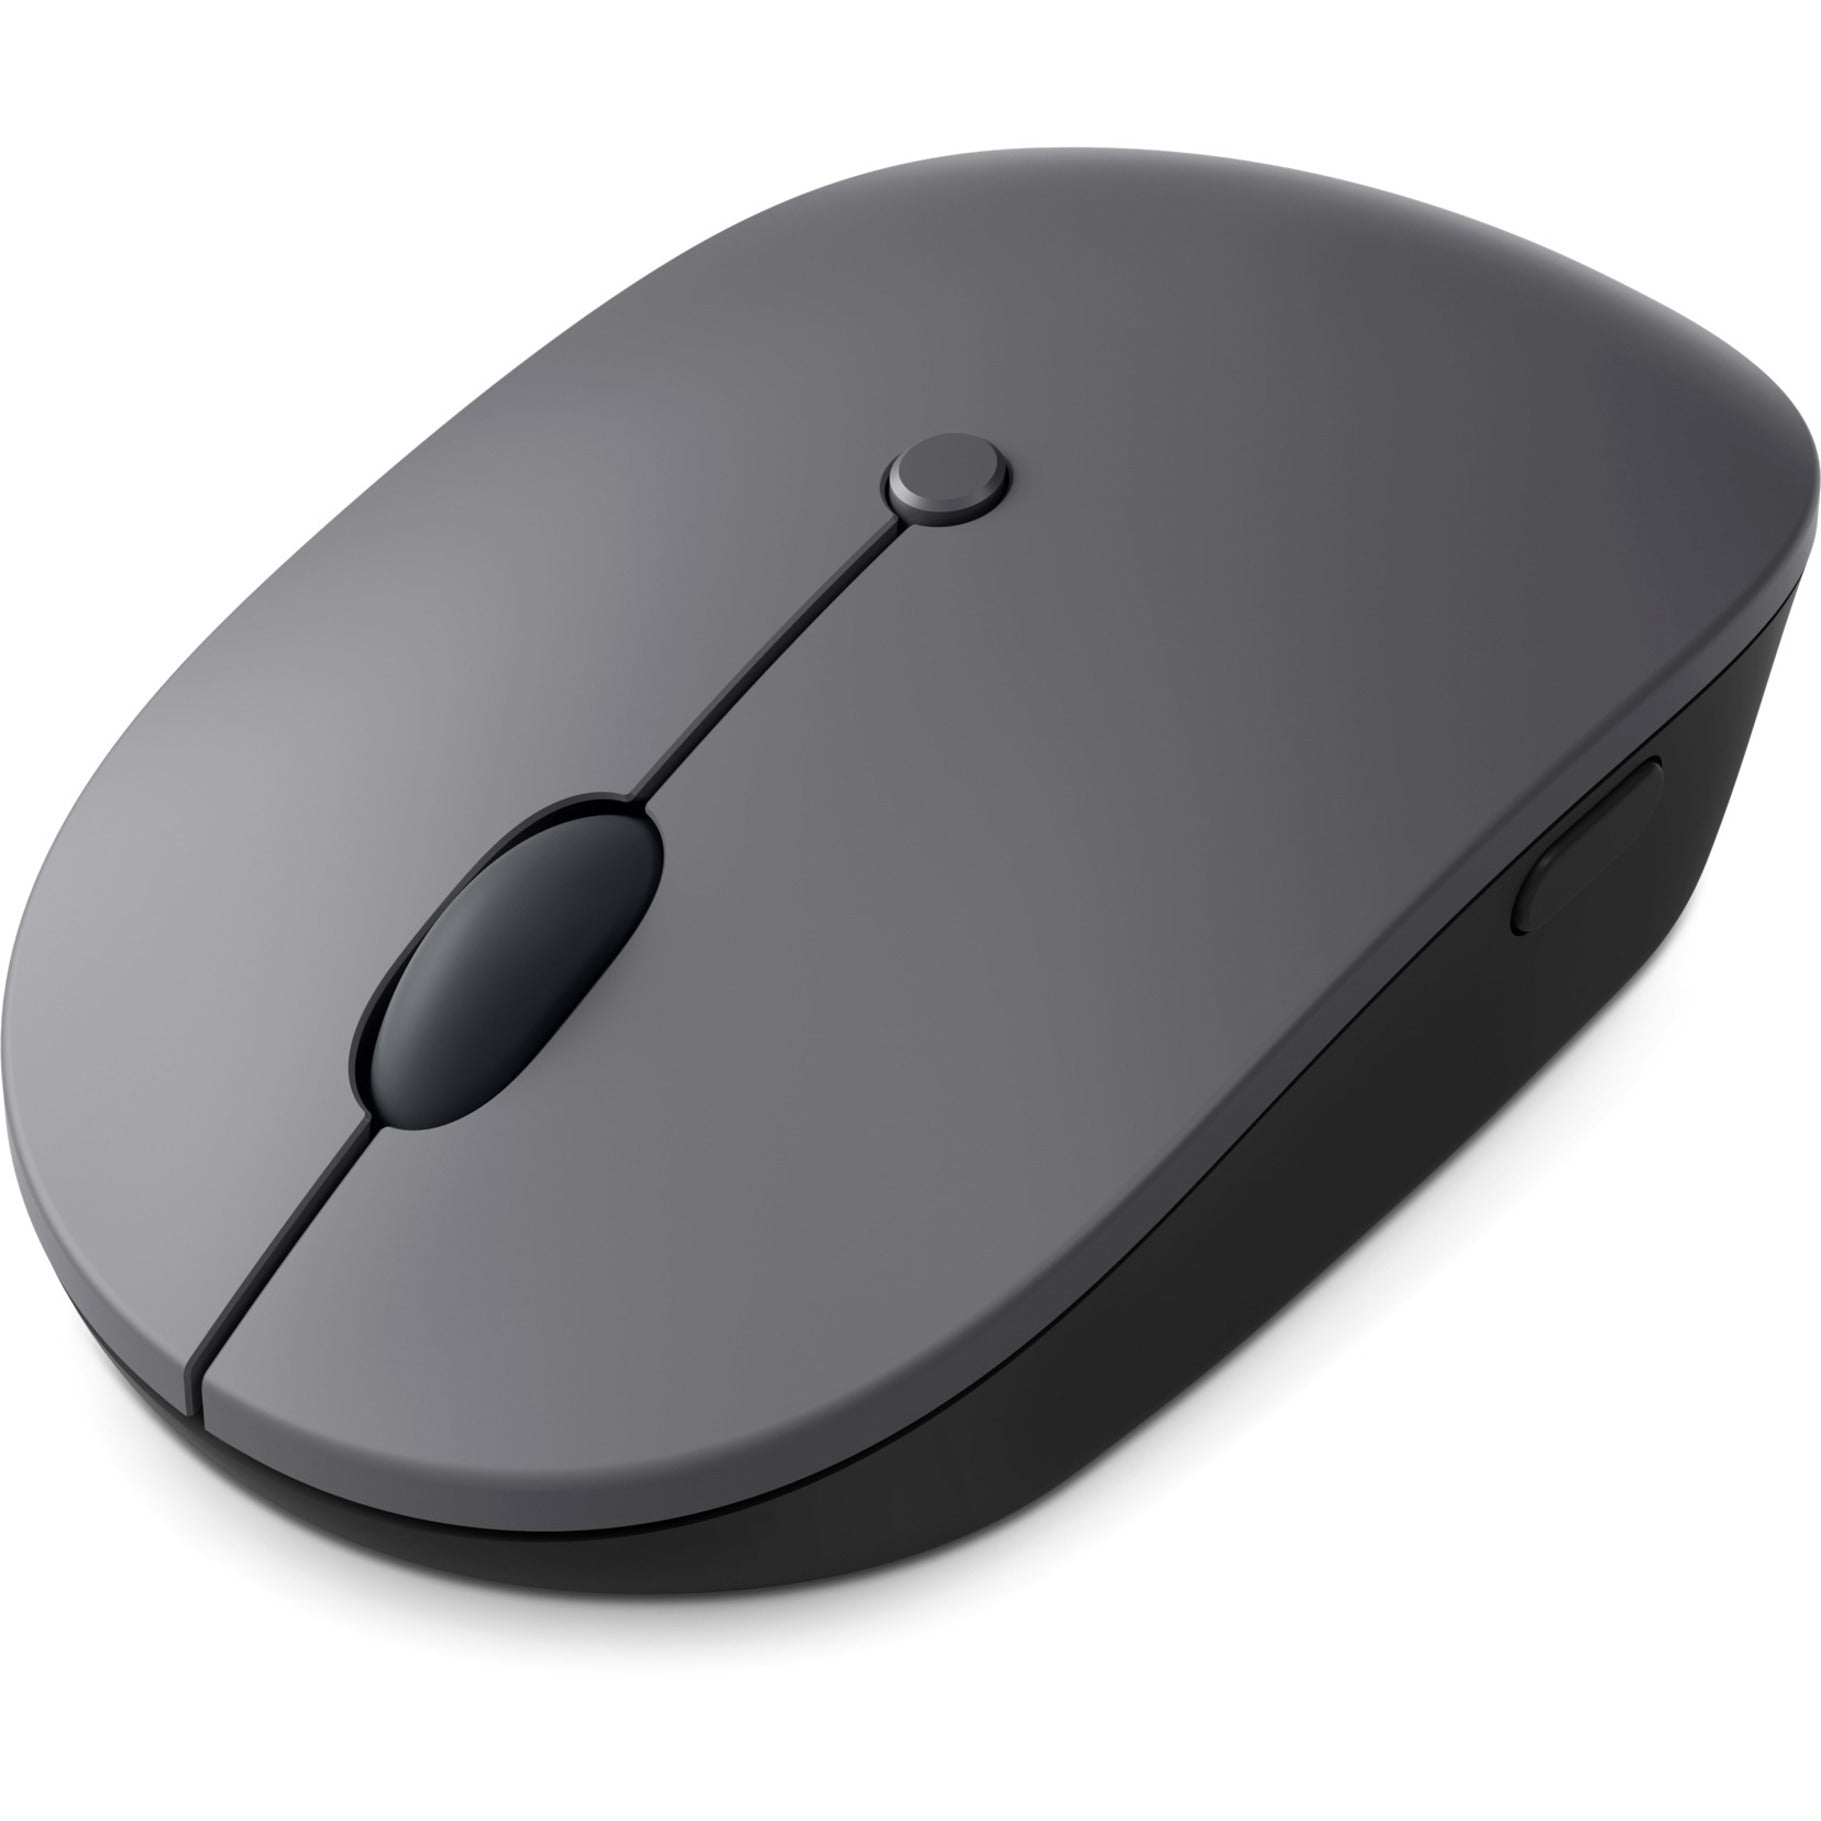 Lenovo 4Y51C21216 Go USB-C Wireless Mouse - Storm Grey, Rechargeable, 4000 dpi, 2.4 GHz